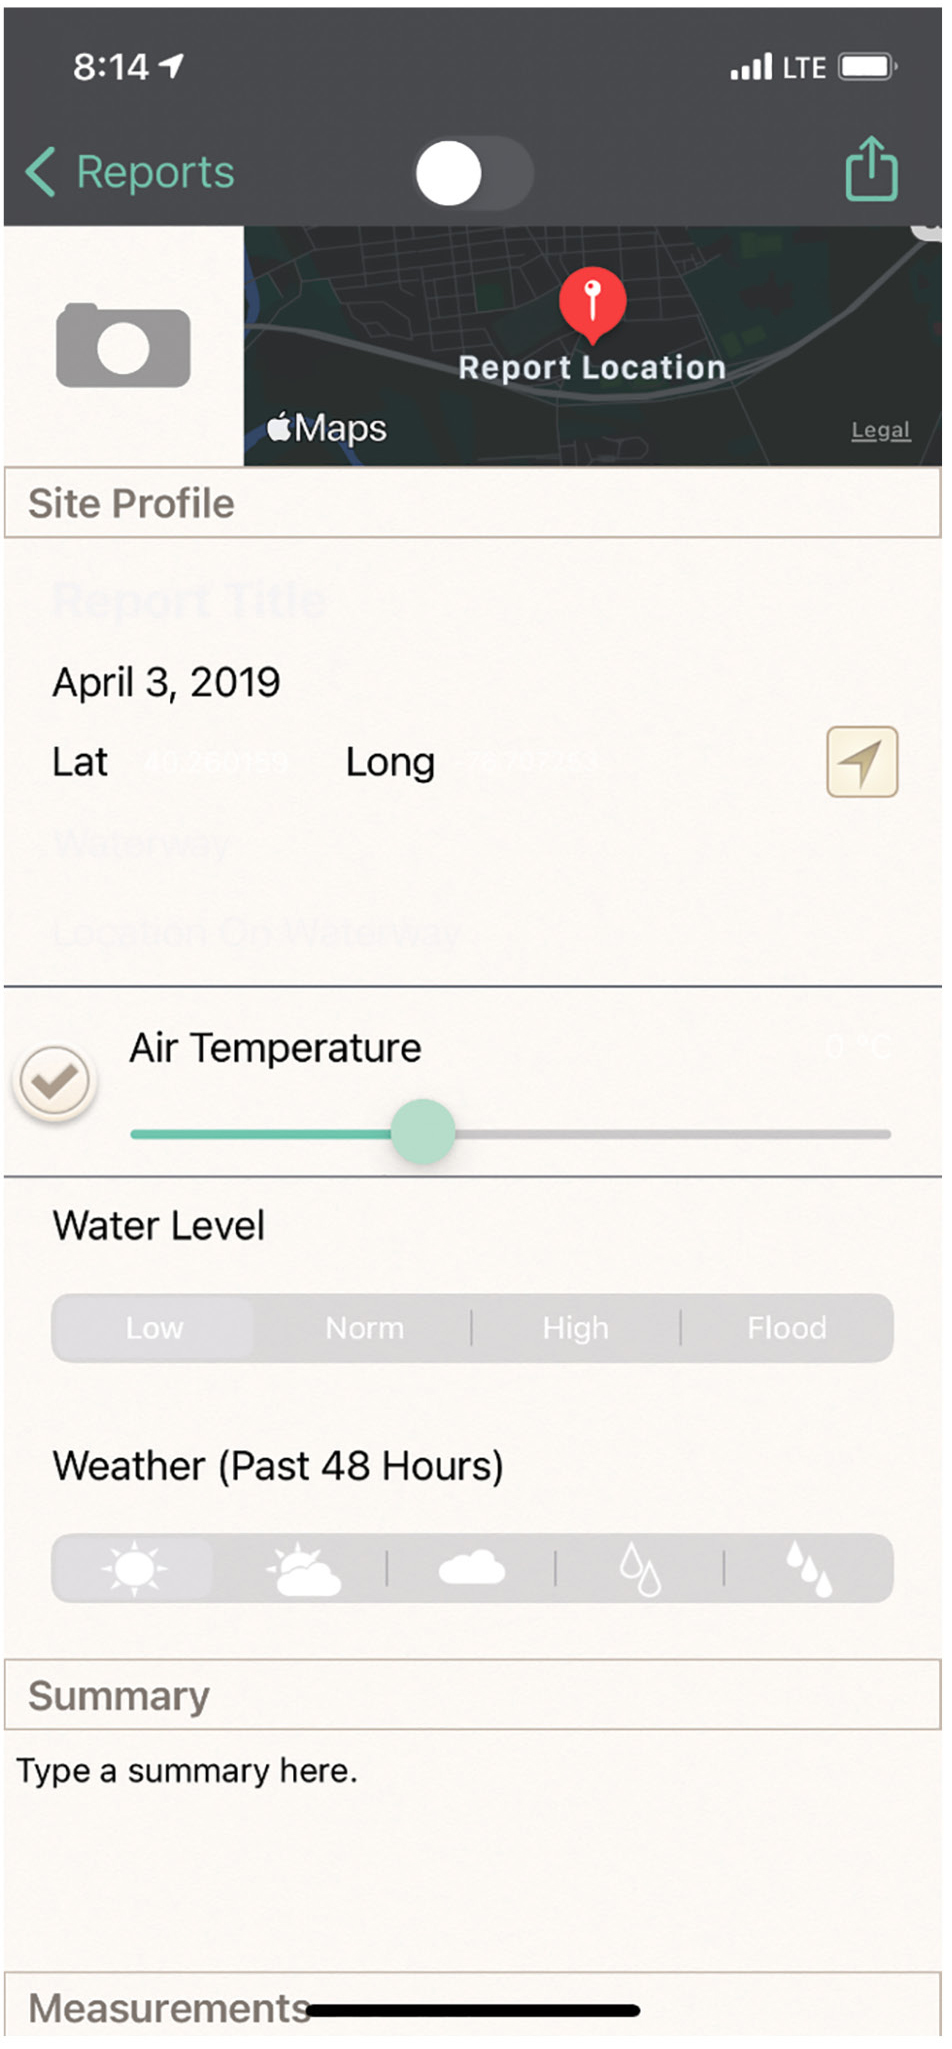 Figure 1 Snapshot of blank report for water quality app.  Data collected about the stream, including specific location and physical, chemical and biological test results can be inputted into a report on the app.  